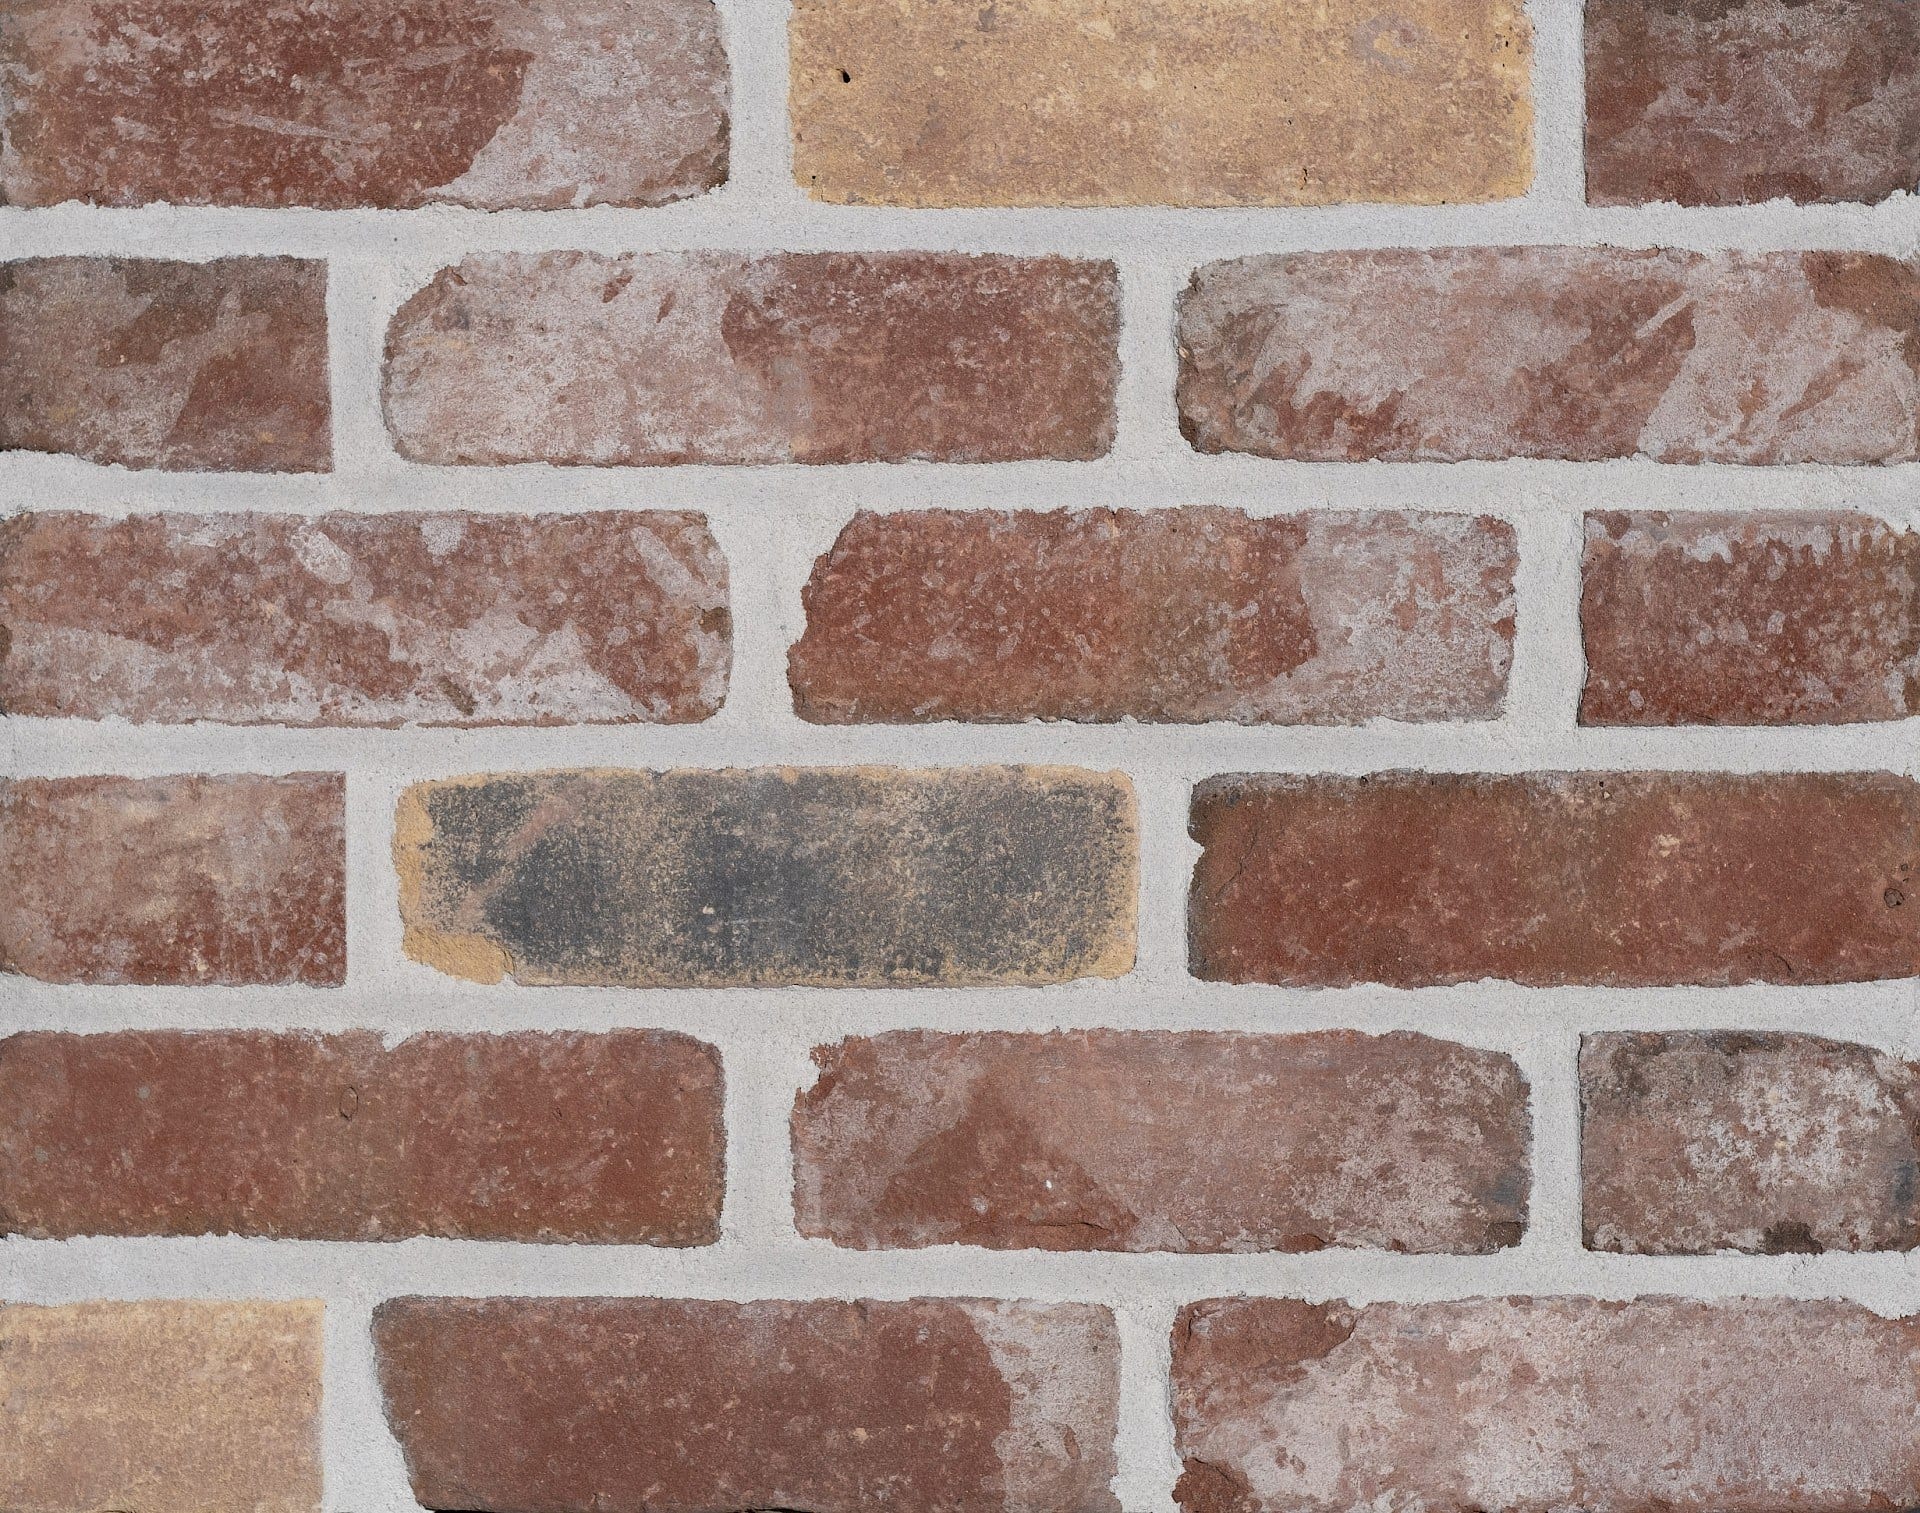 A photo of the Camtech Rustica Old Renoir brick in use.